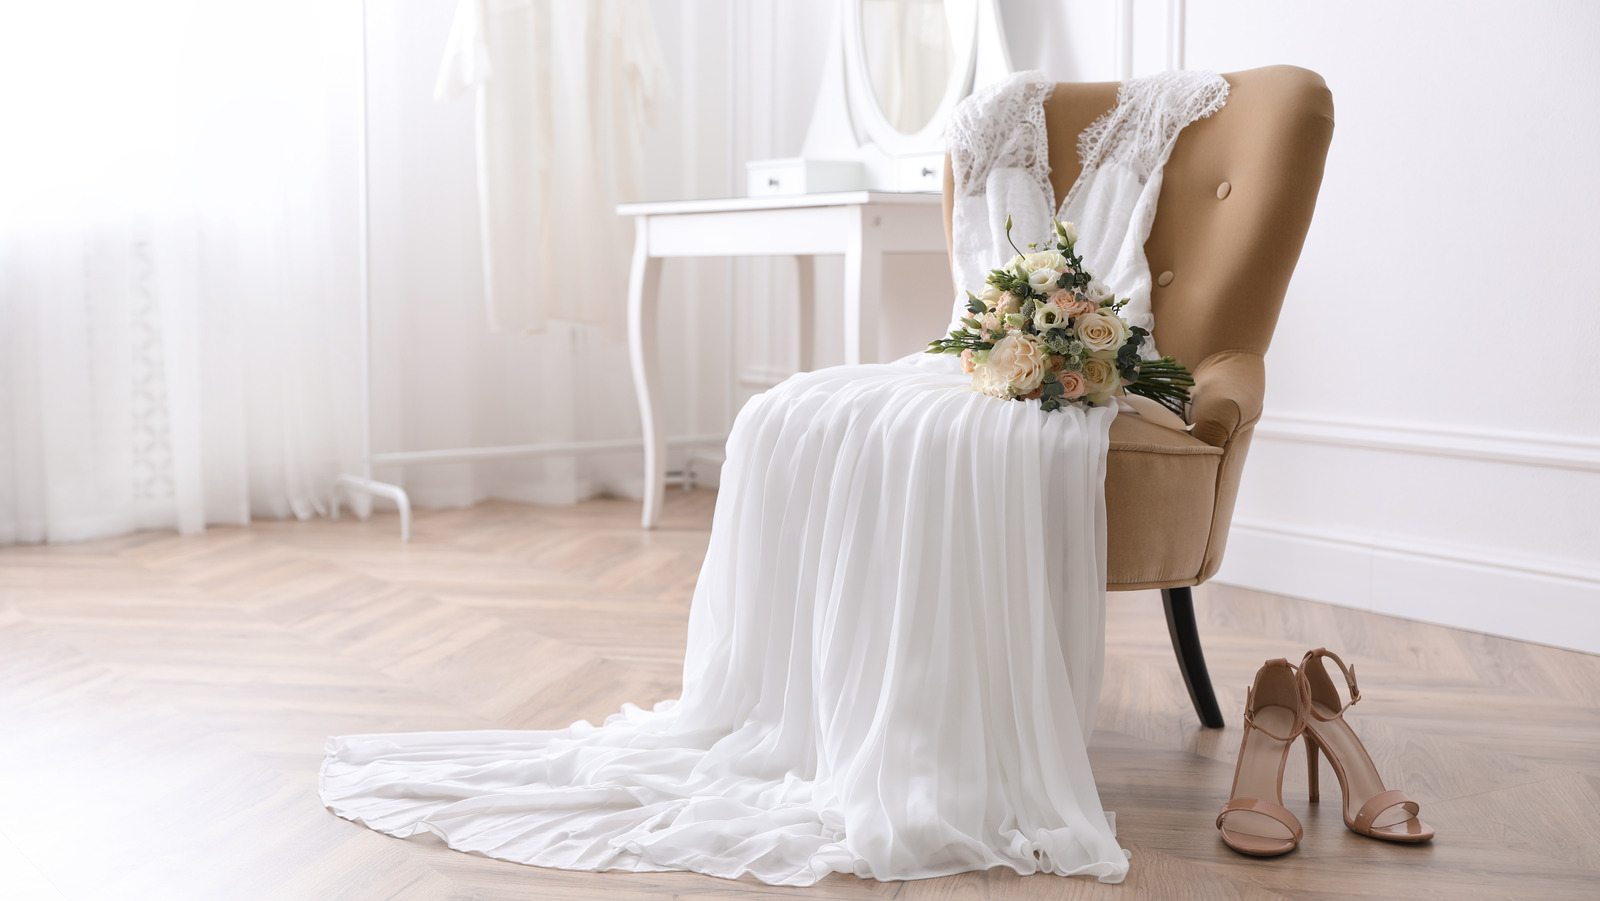 Disaster-Proof Traveling With Your Destination Wedding Dress – Explore